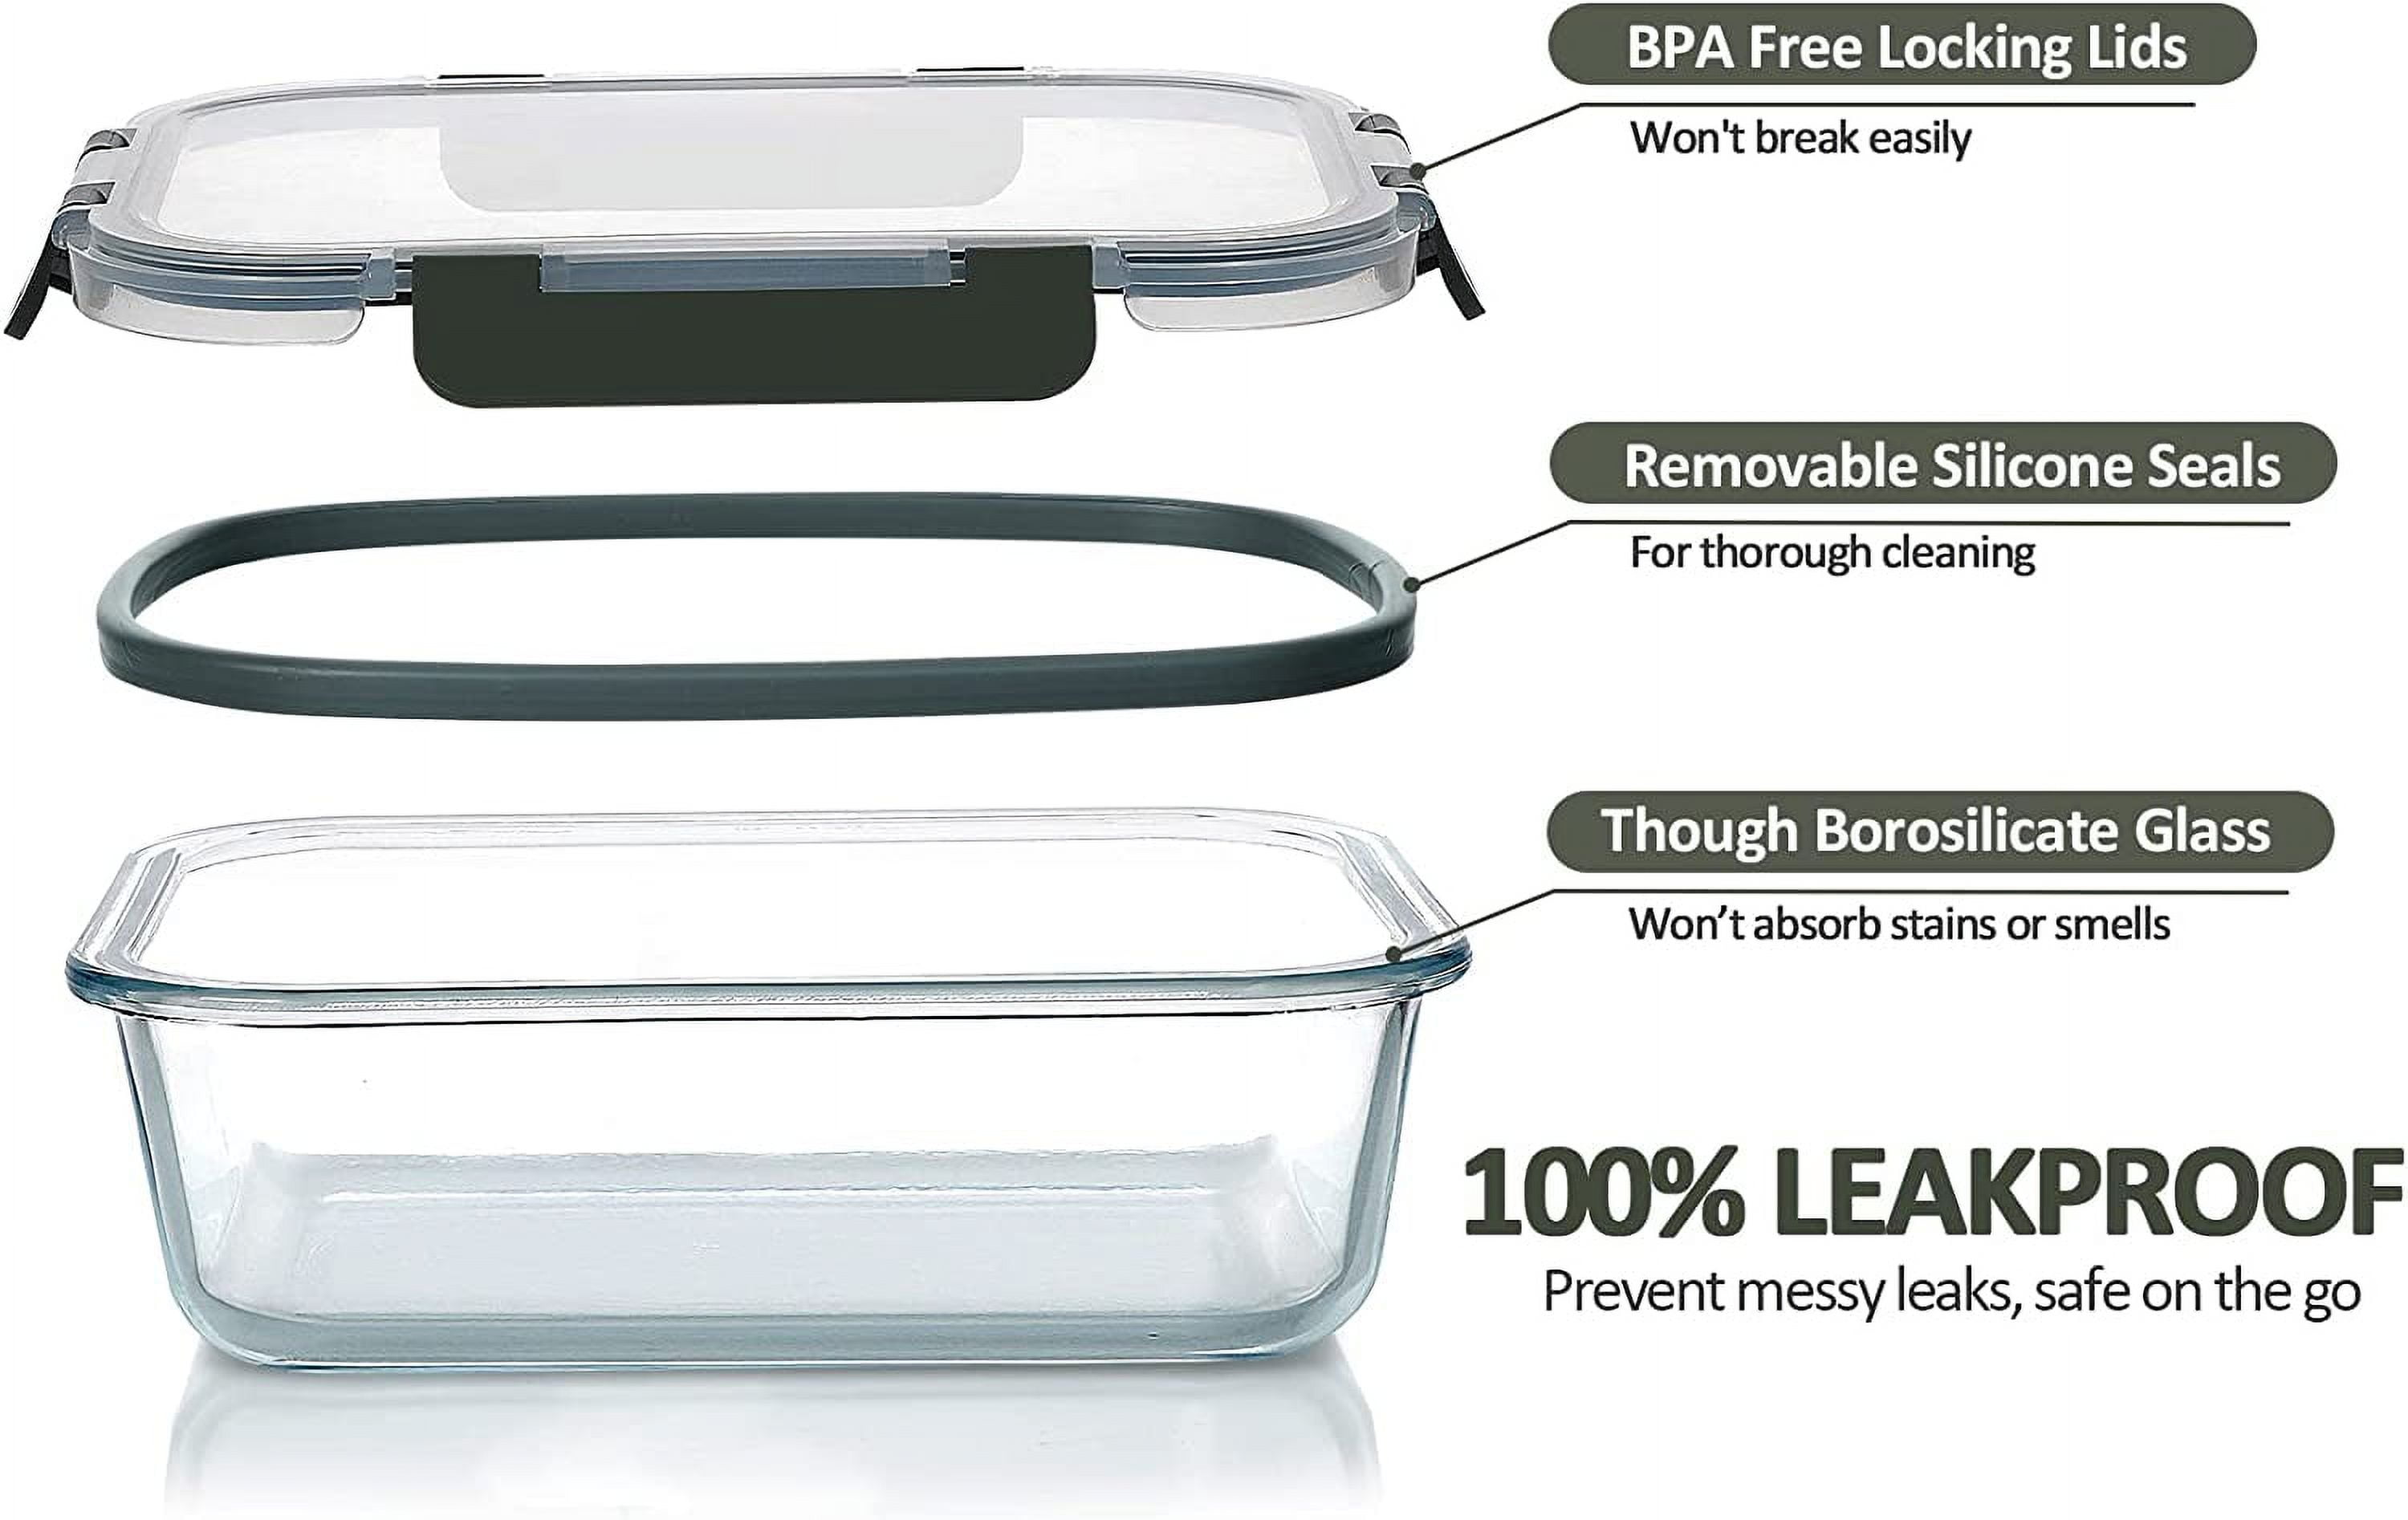 KOMUEE 12 Packs Glass Meal Prep Containers Set, Glass Food Storage  Containers with Locking Lids, Airtight Glass Lunch Containers, BPA Free,  Microwave